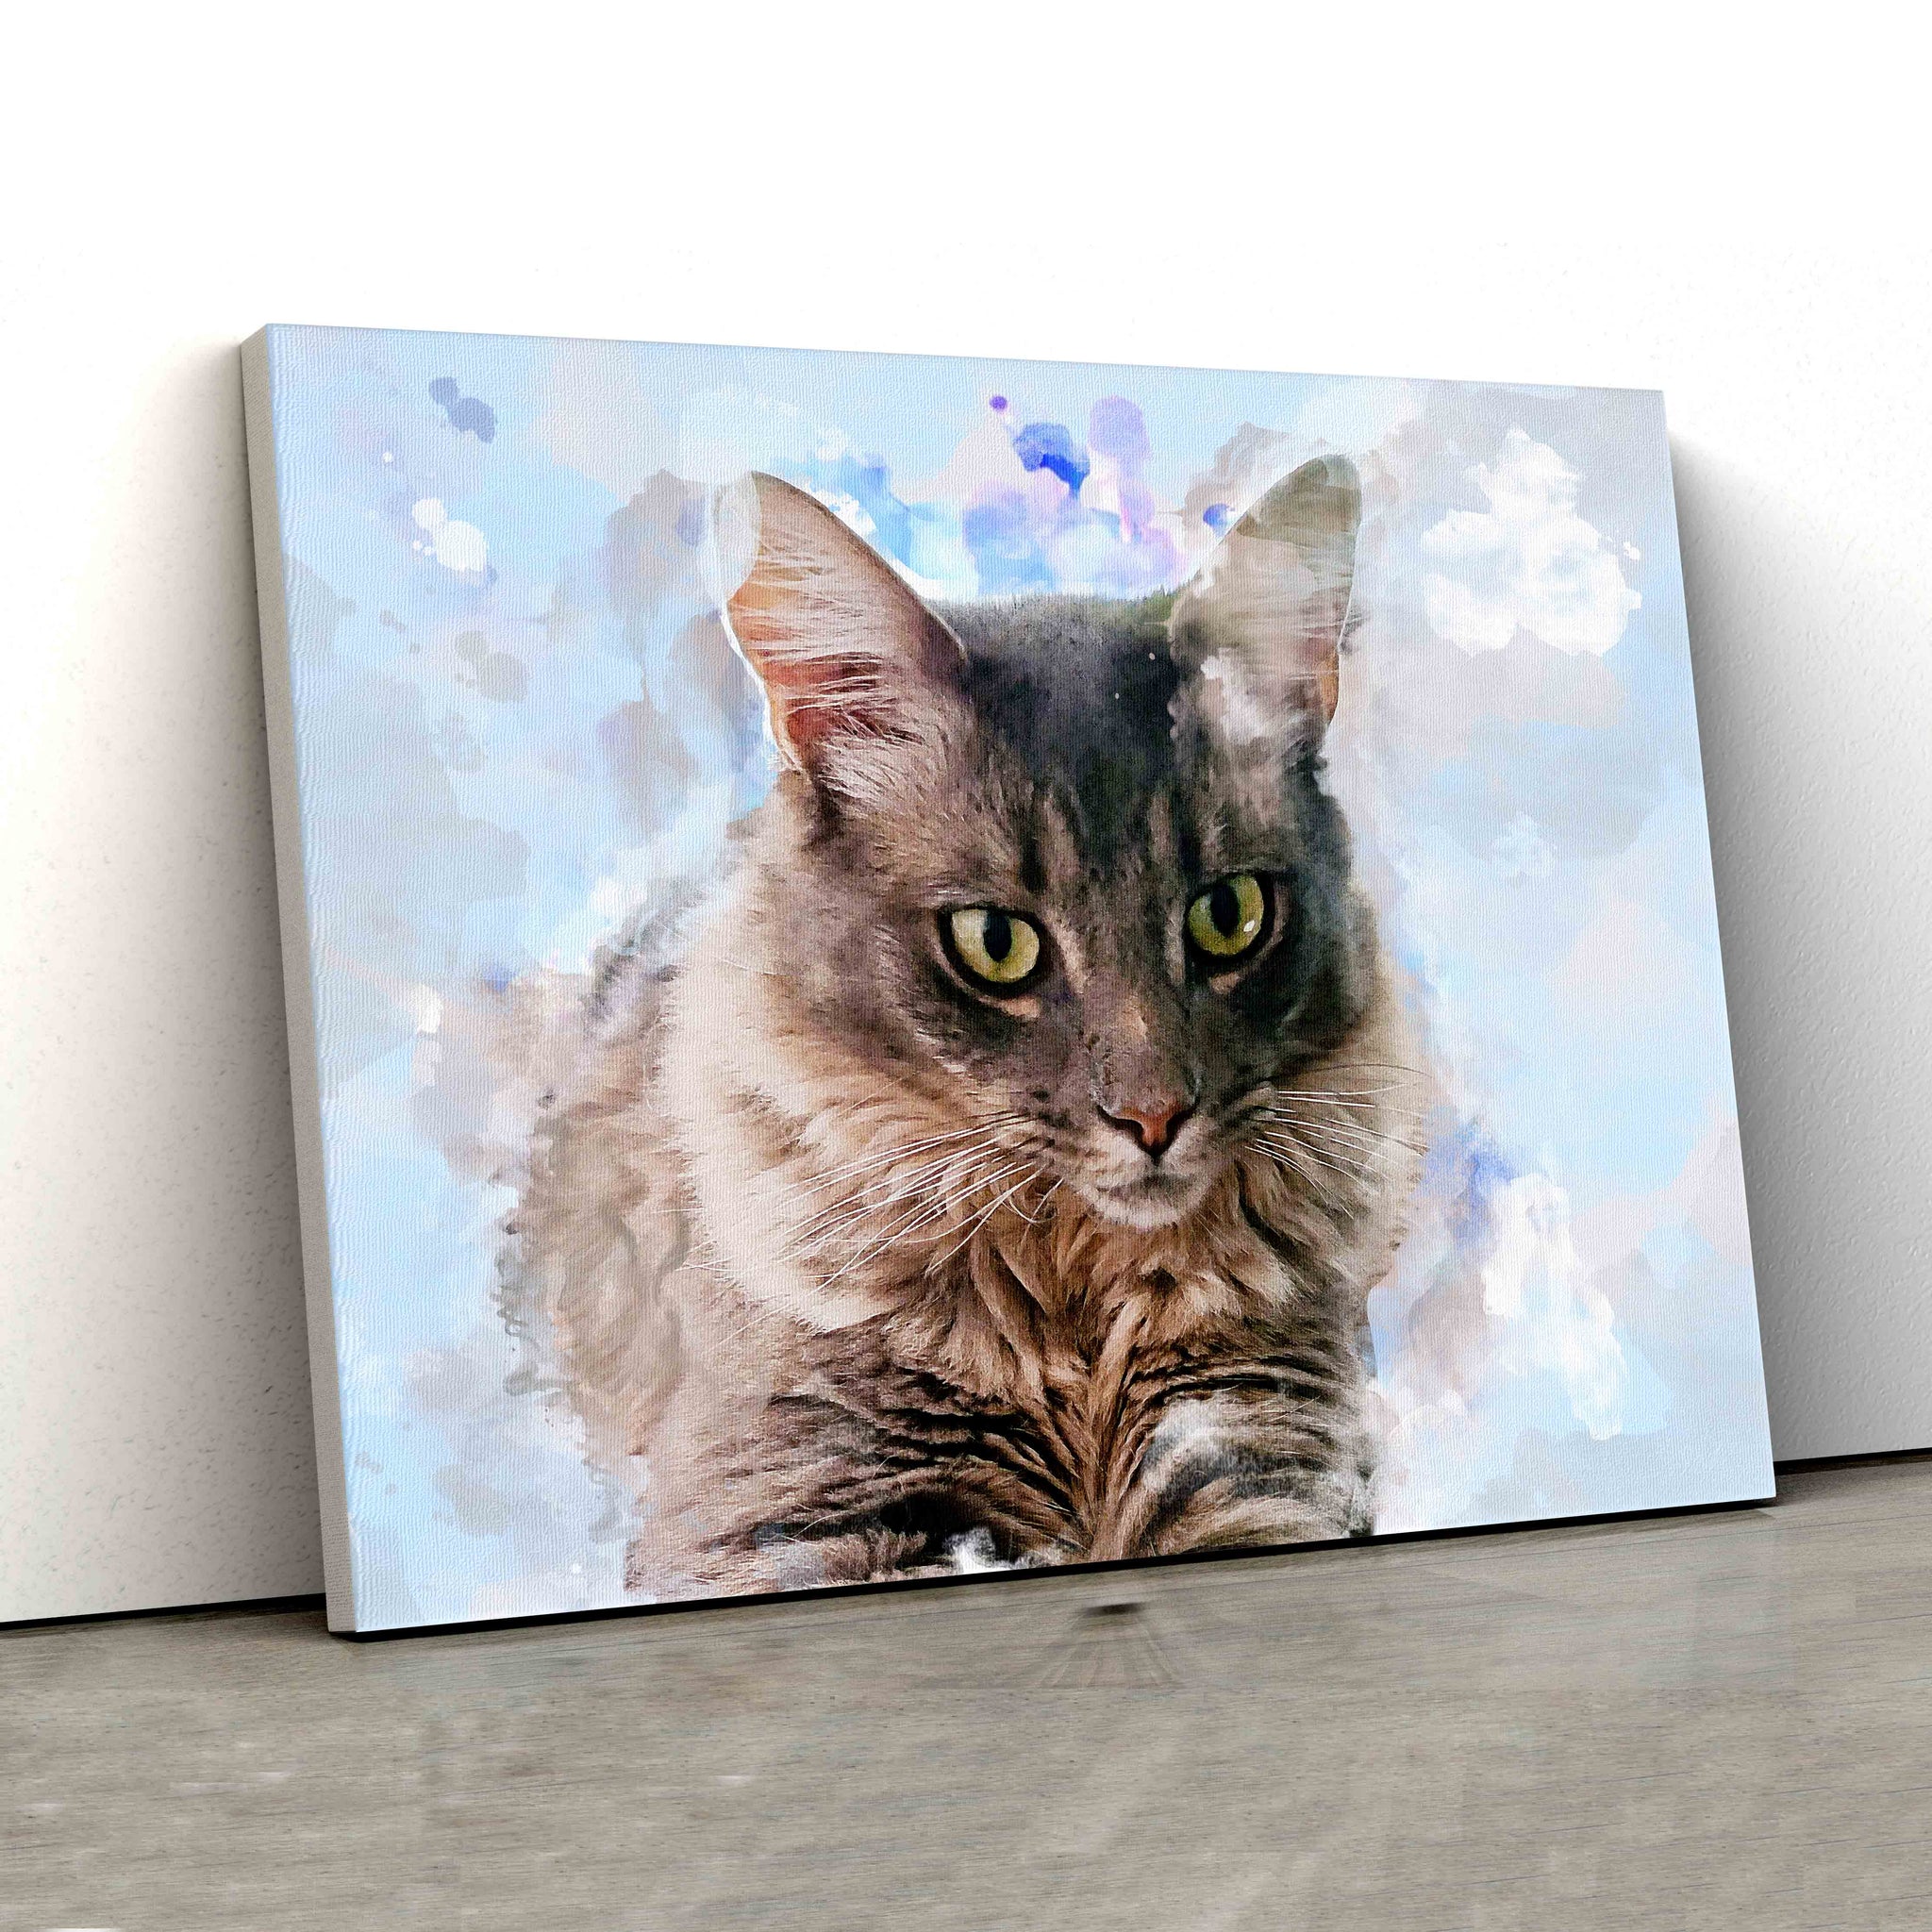 Personalized Image Canvas, Cat Paintings On Canvas, Cat Canvas Art, Cat Canvas, Family Canvas, Canvas Wall Art, Gift Canvas